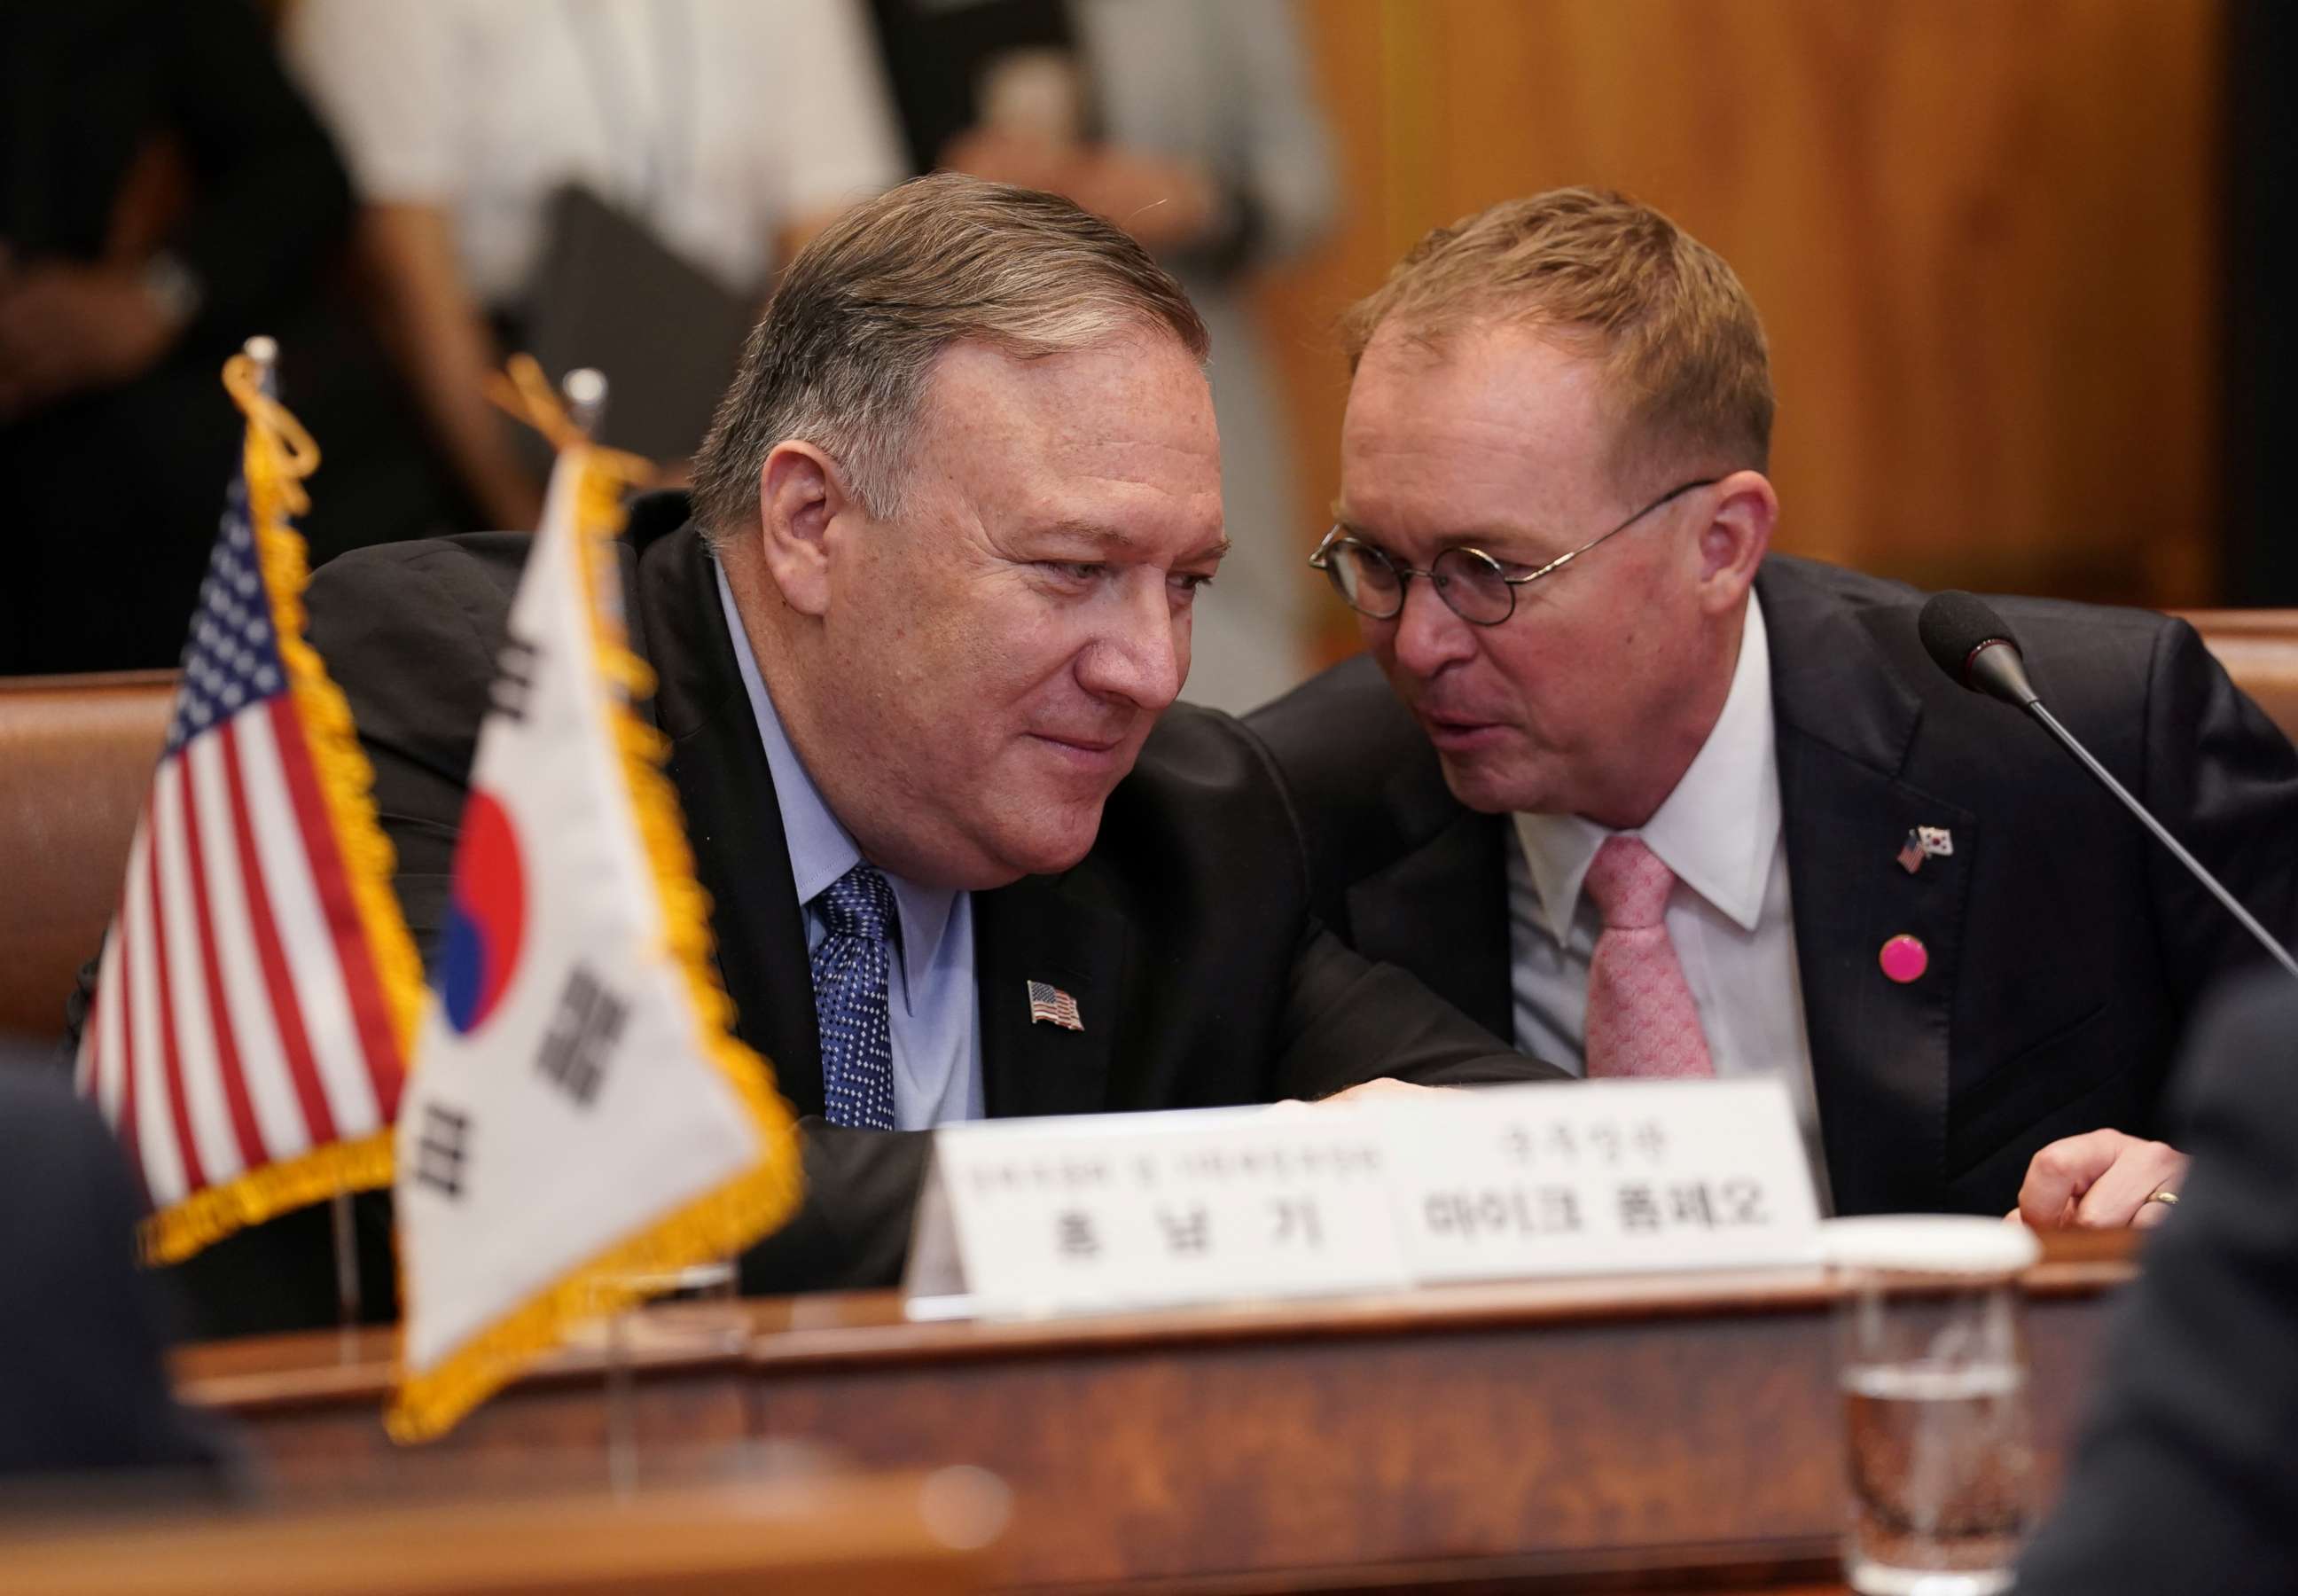 PHOTO: U.S. Secretary of State Mike Pompeo and White House acting Chief of Staff Mick Mulvaney attend a meeting with South Korean President Moon Jae-in at the Blue House in Seoul, South Korea, June 30, 2019.